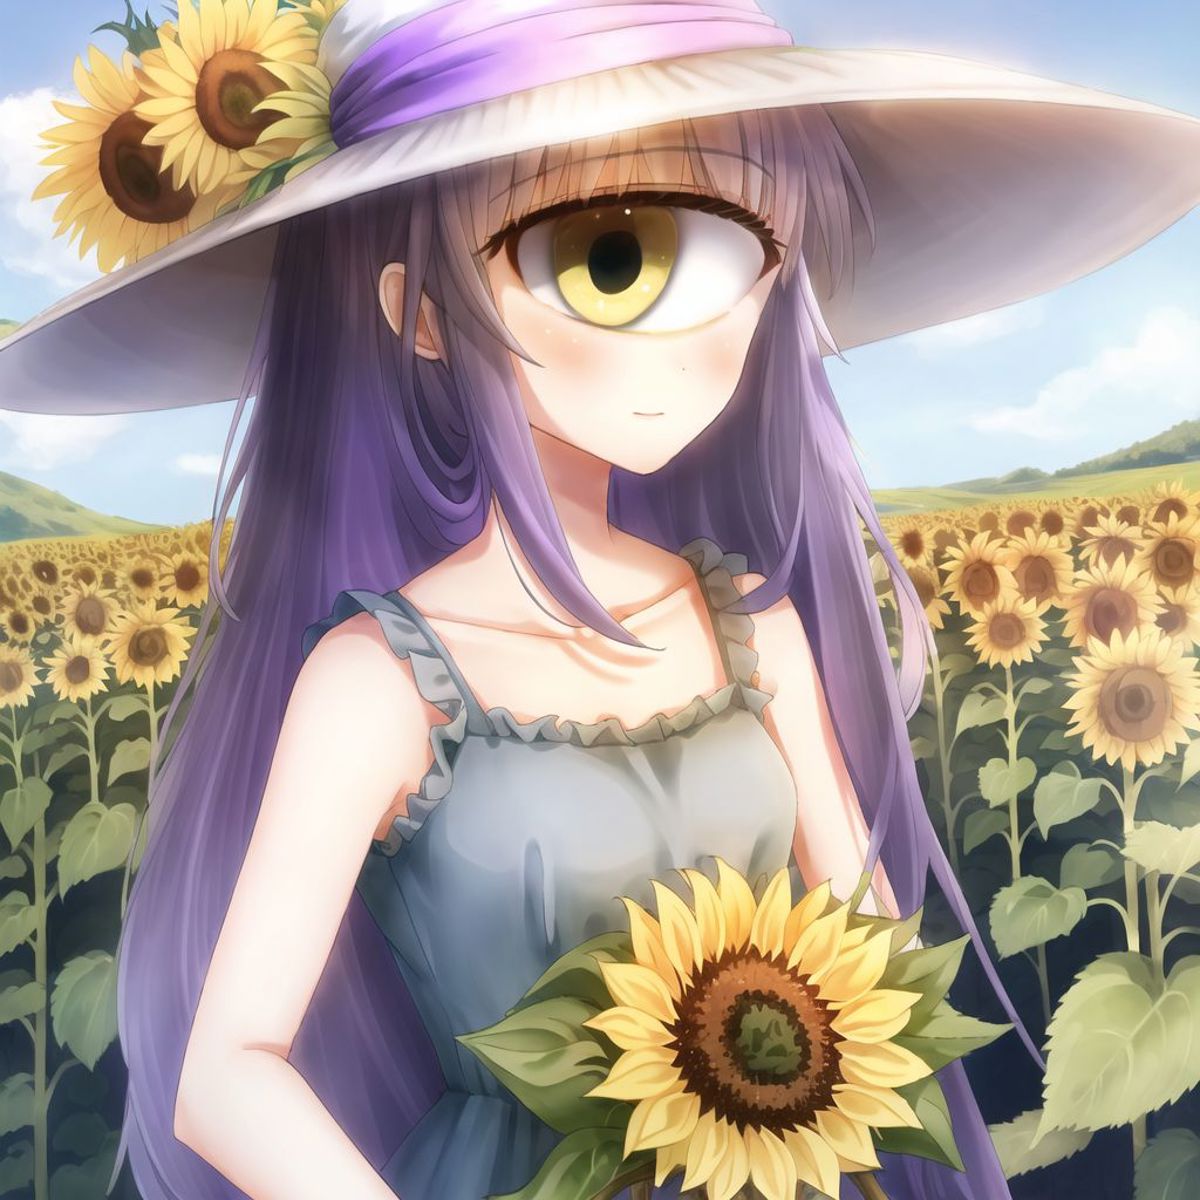 anime girl wearing straw hat holding a sunflower